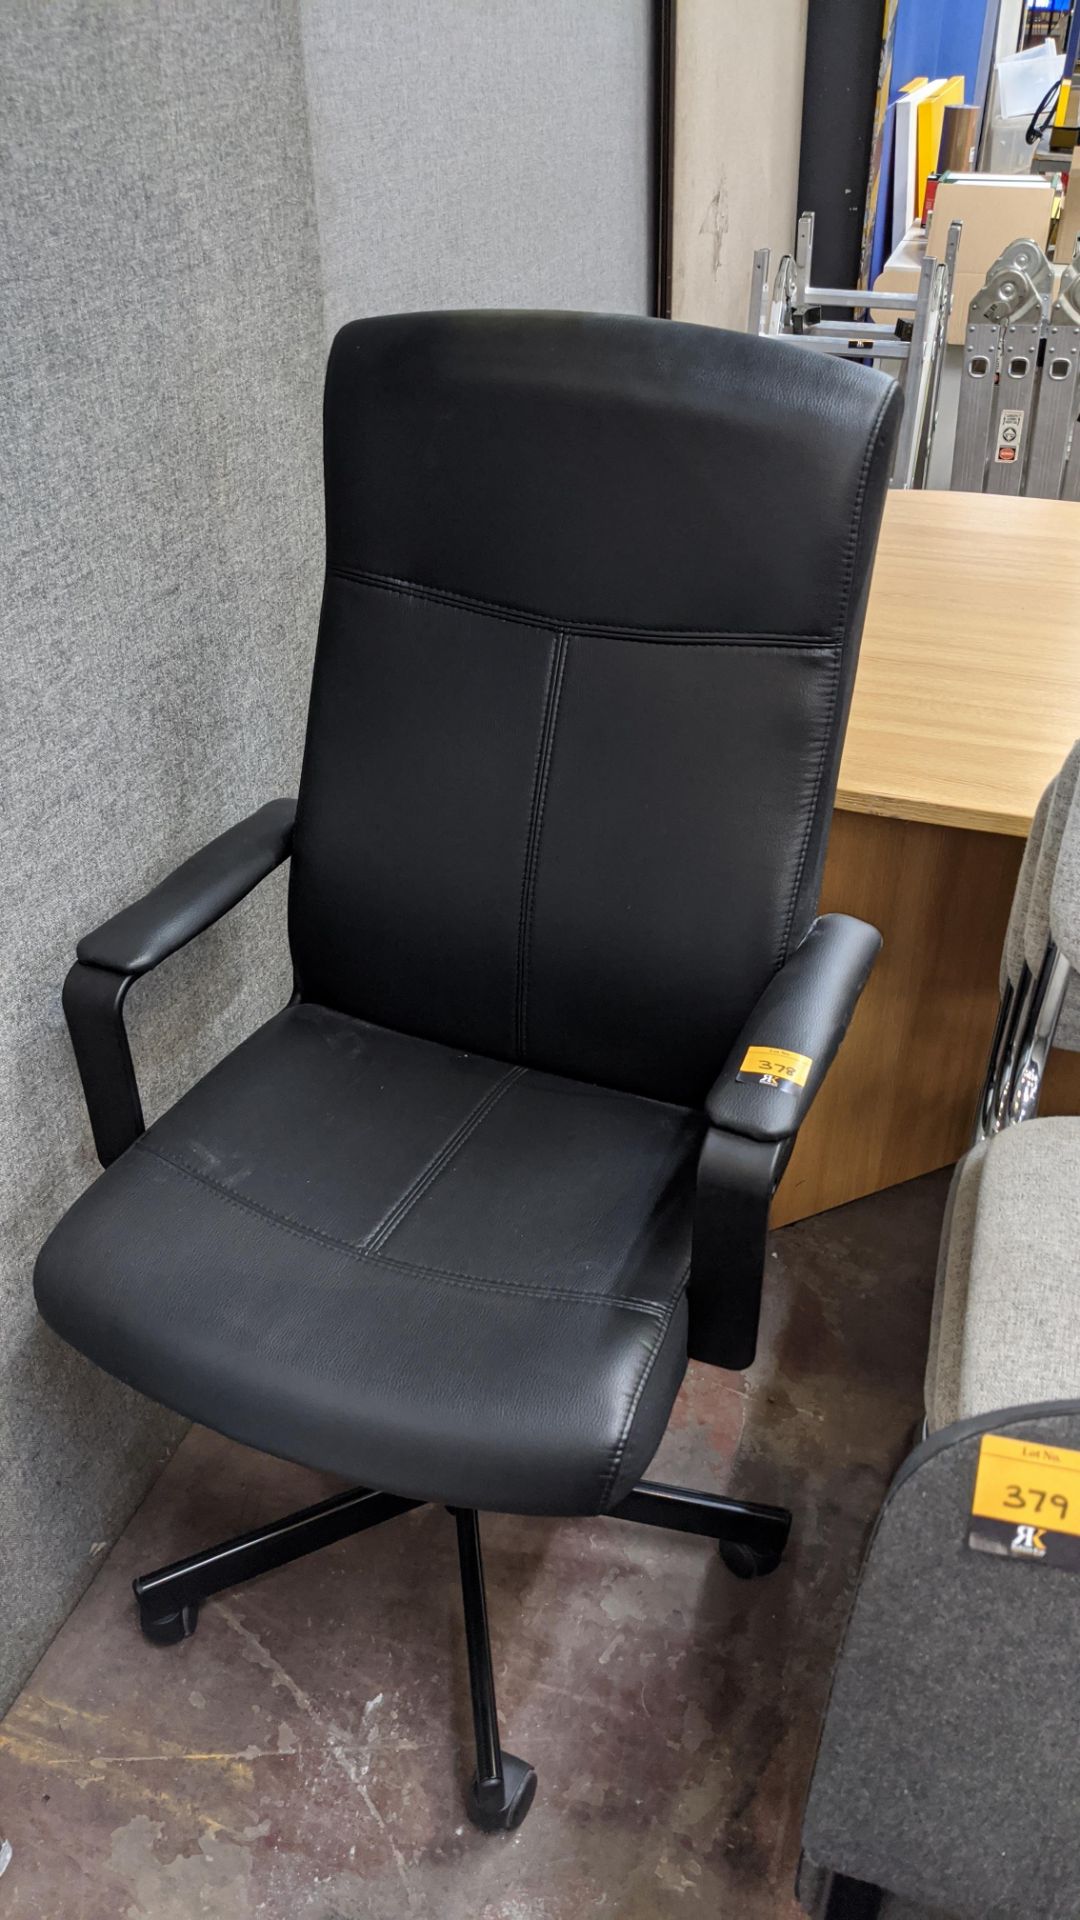 Black leather/leather look exec chair with arms